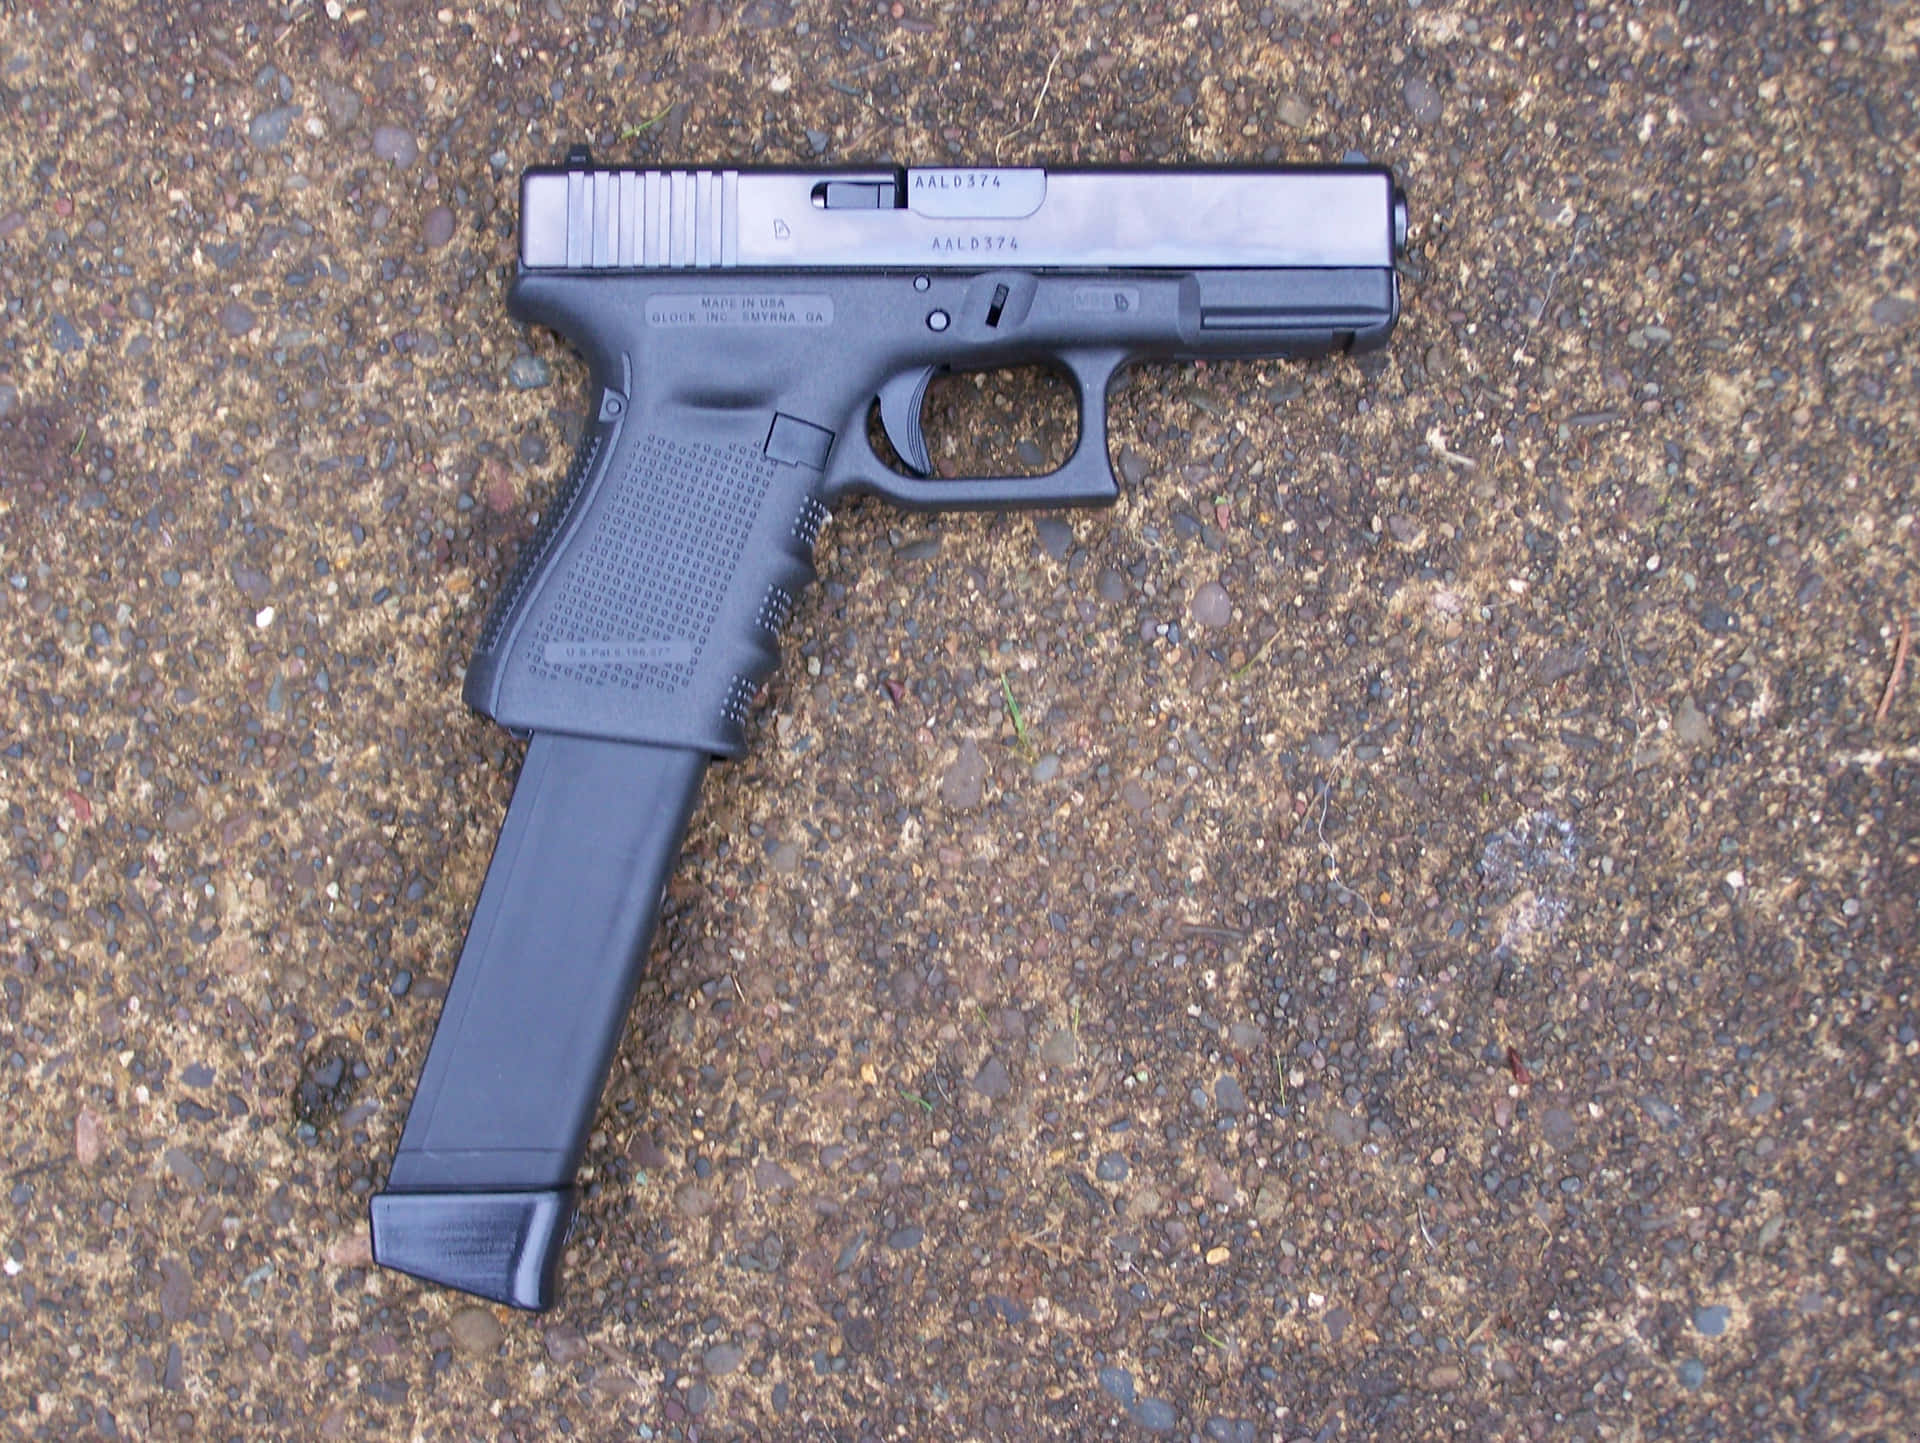 A Glock Pistol Is Laying On The Ground